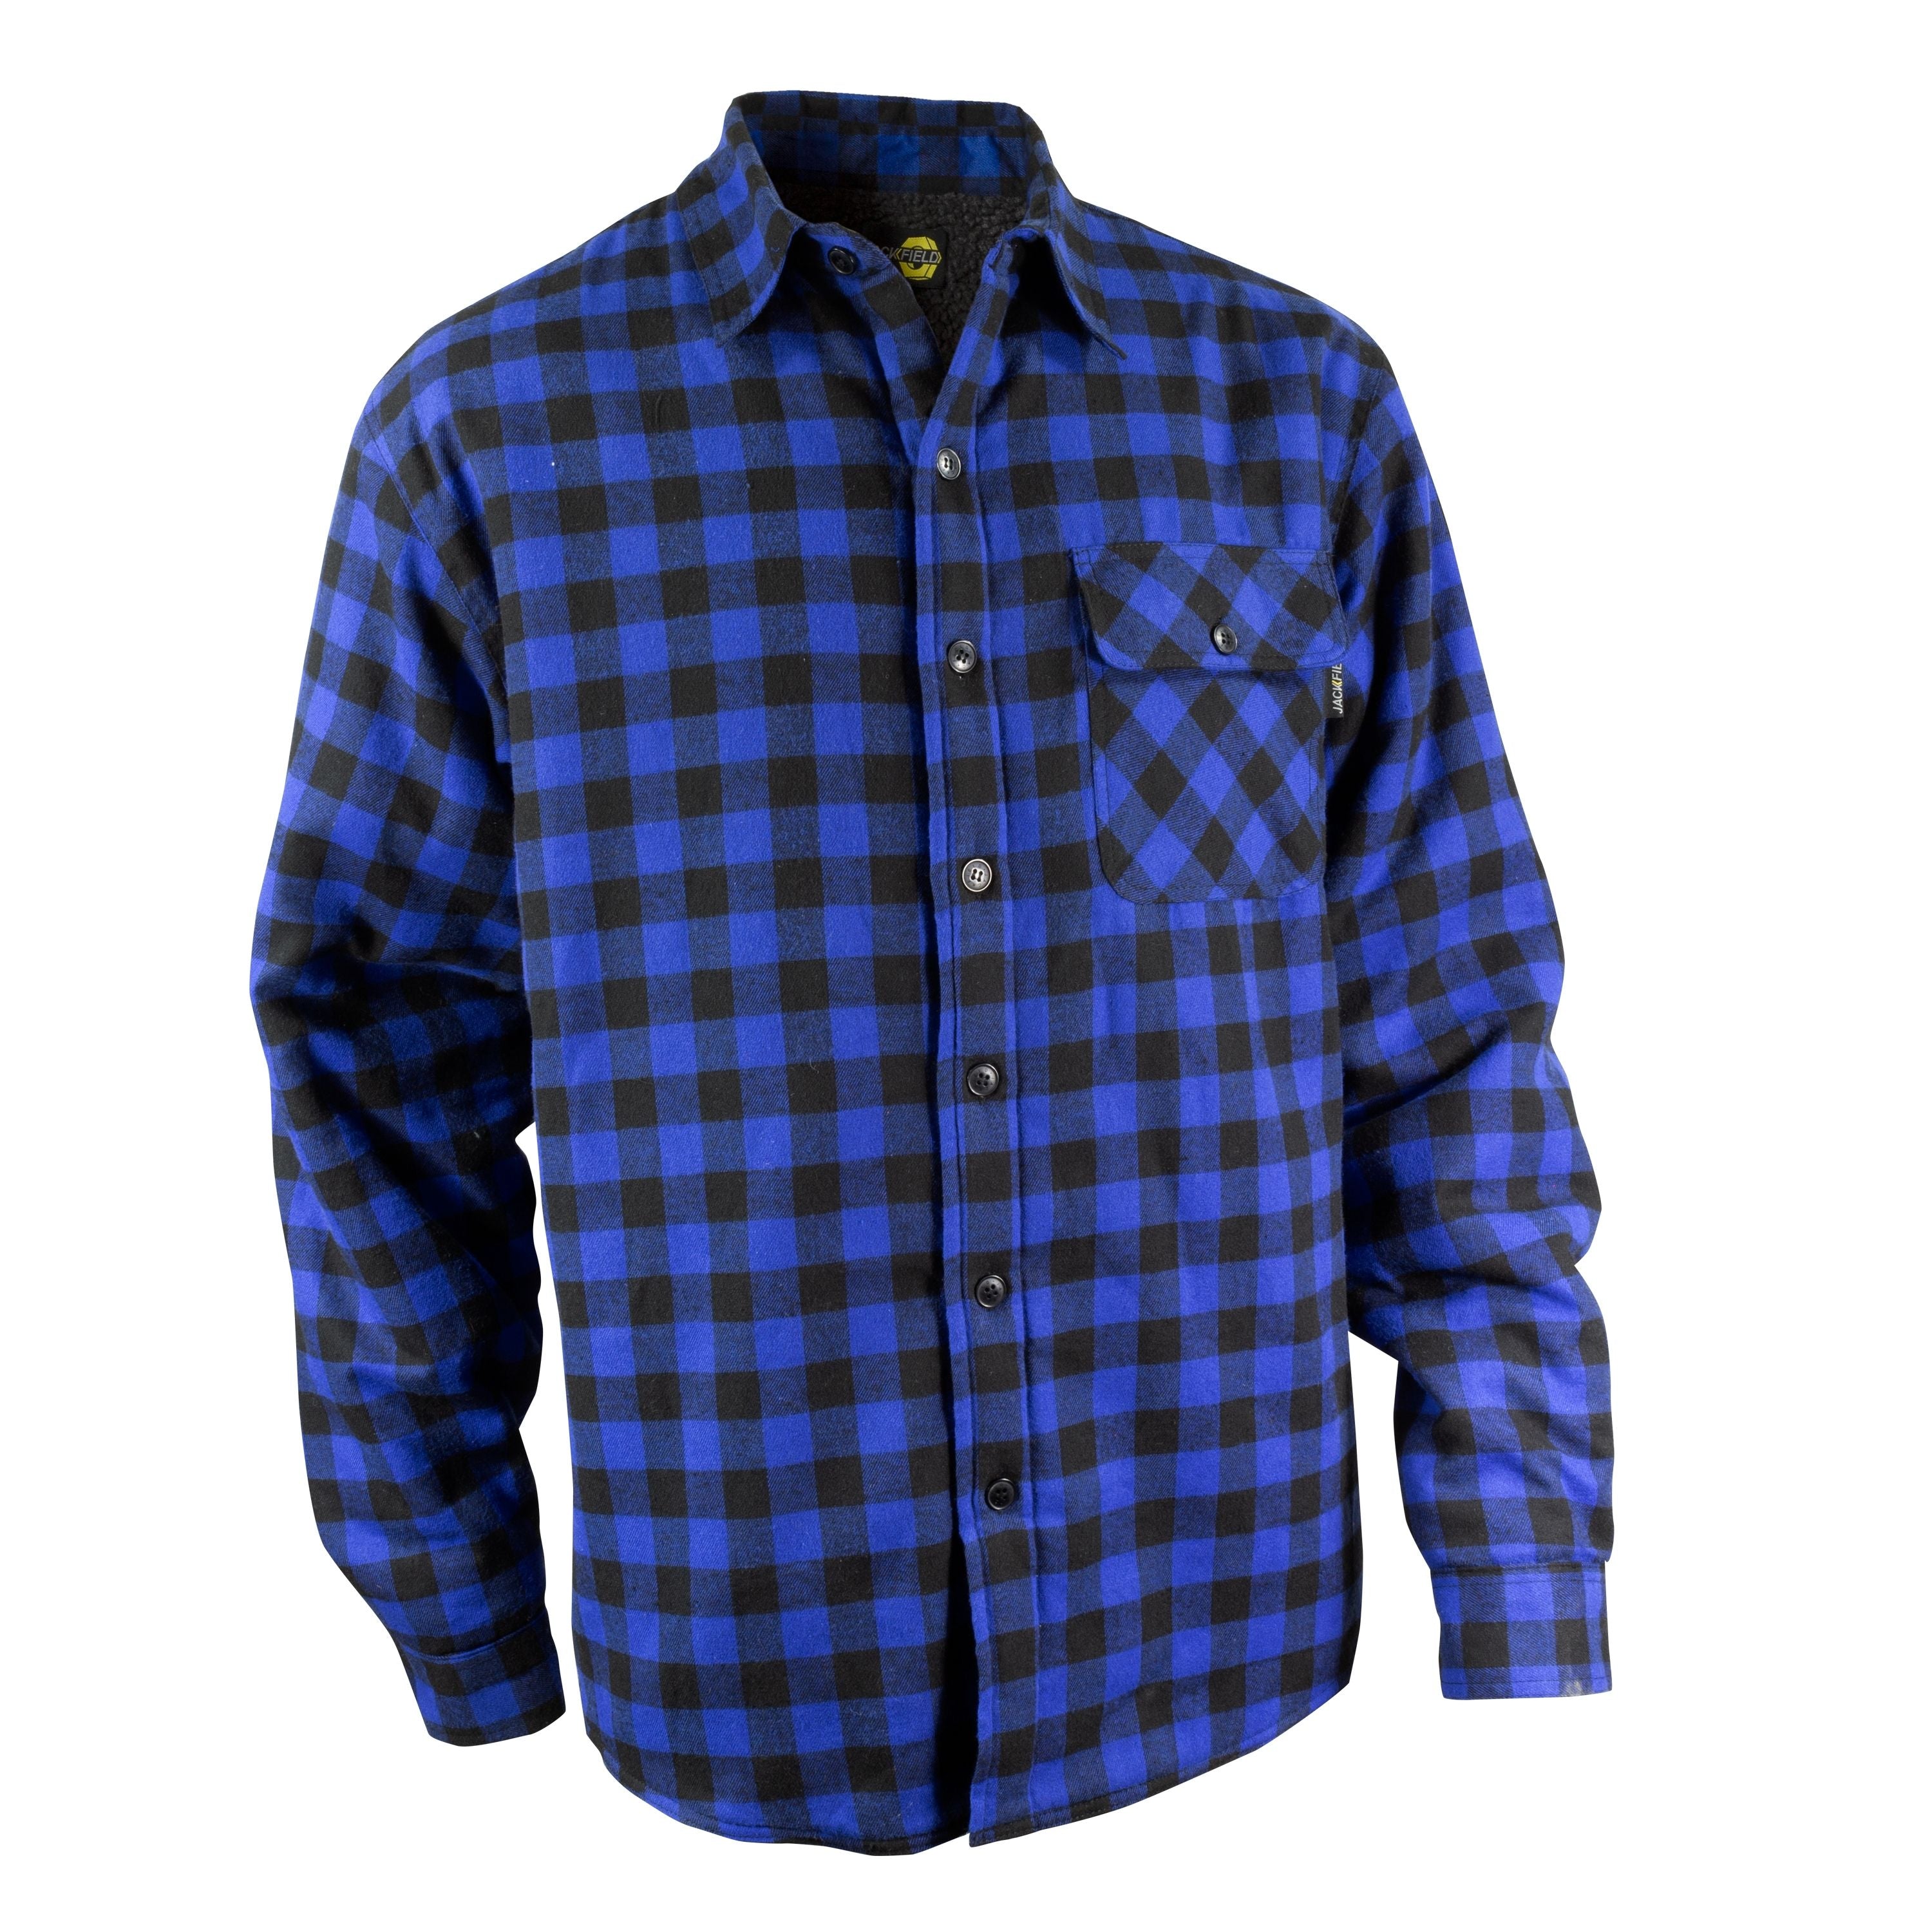 Flannel shirt with sherpa lining - Men’s